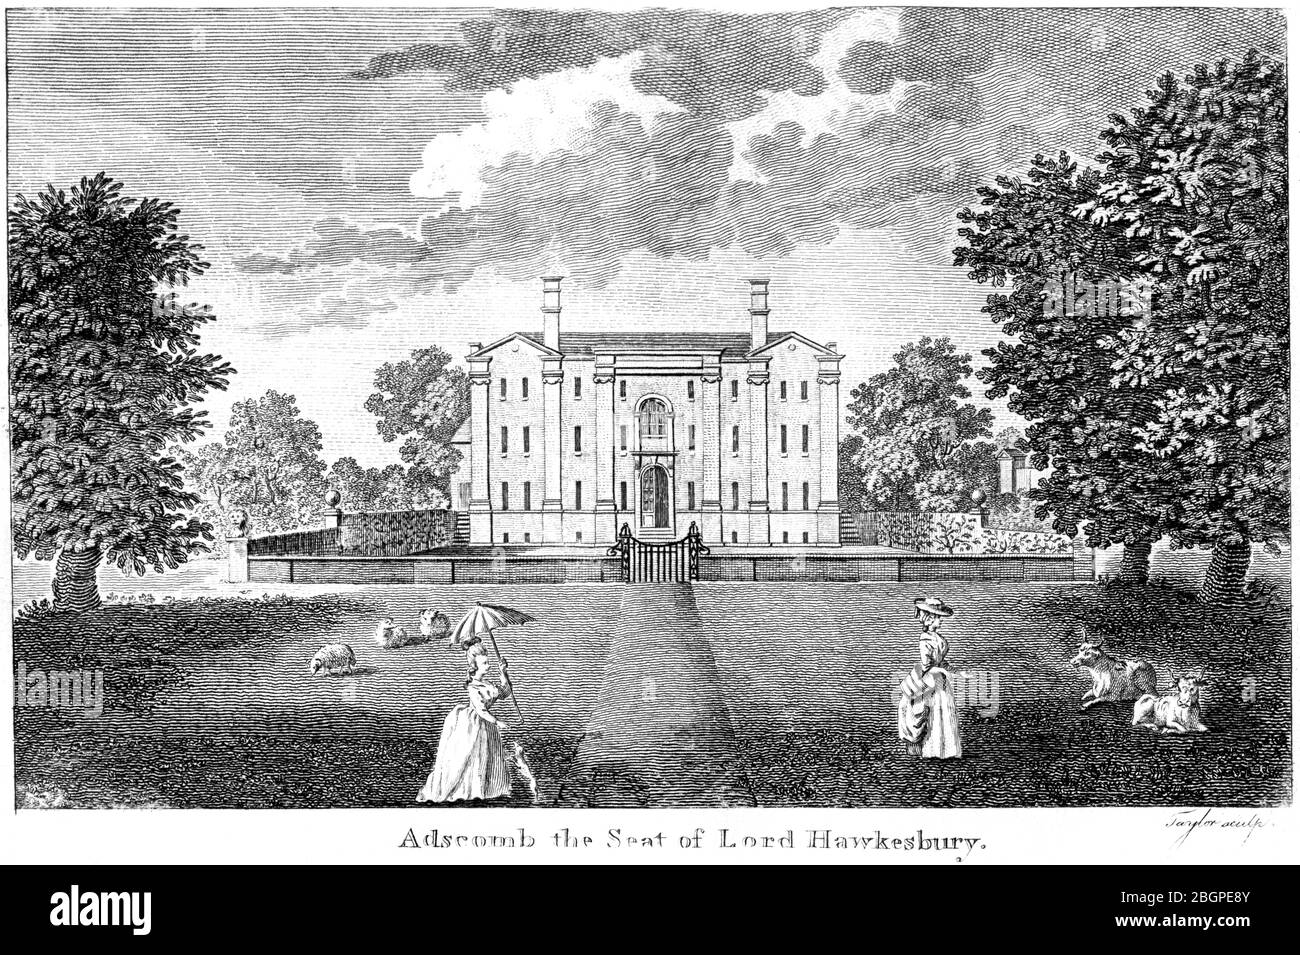 Engraving of Adscomb (Addiscombe House) the Seat of Lord Hawkesbury scanned at high resolution from a book printed in 1827.  Believed copyright free. Stock Photo